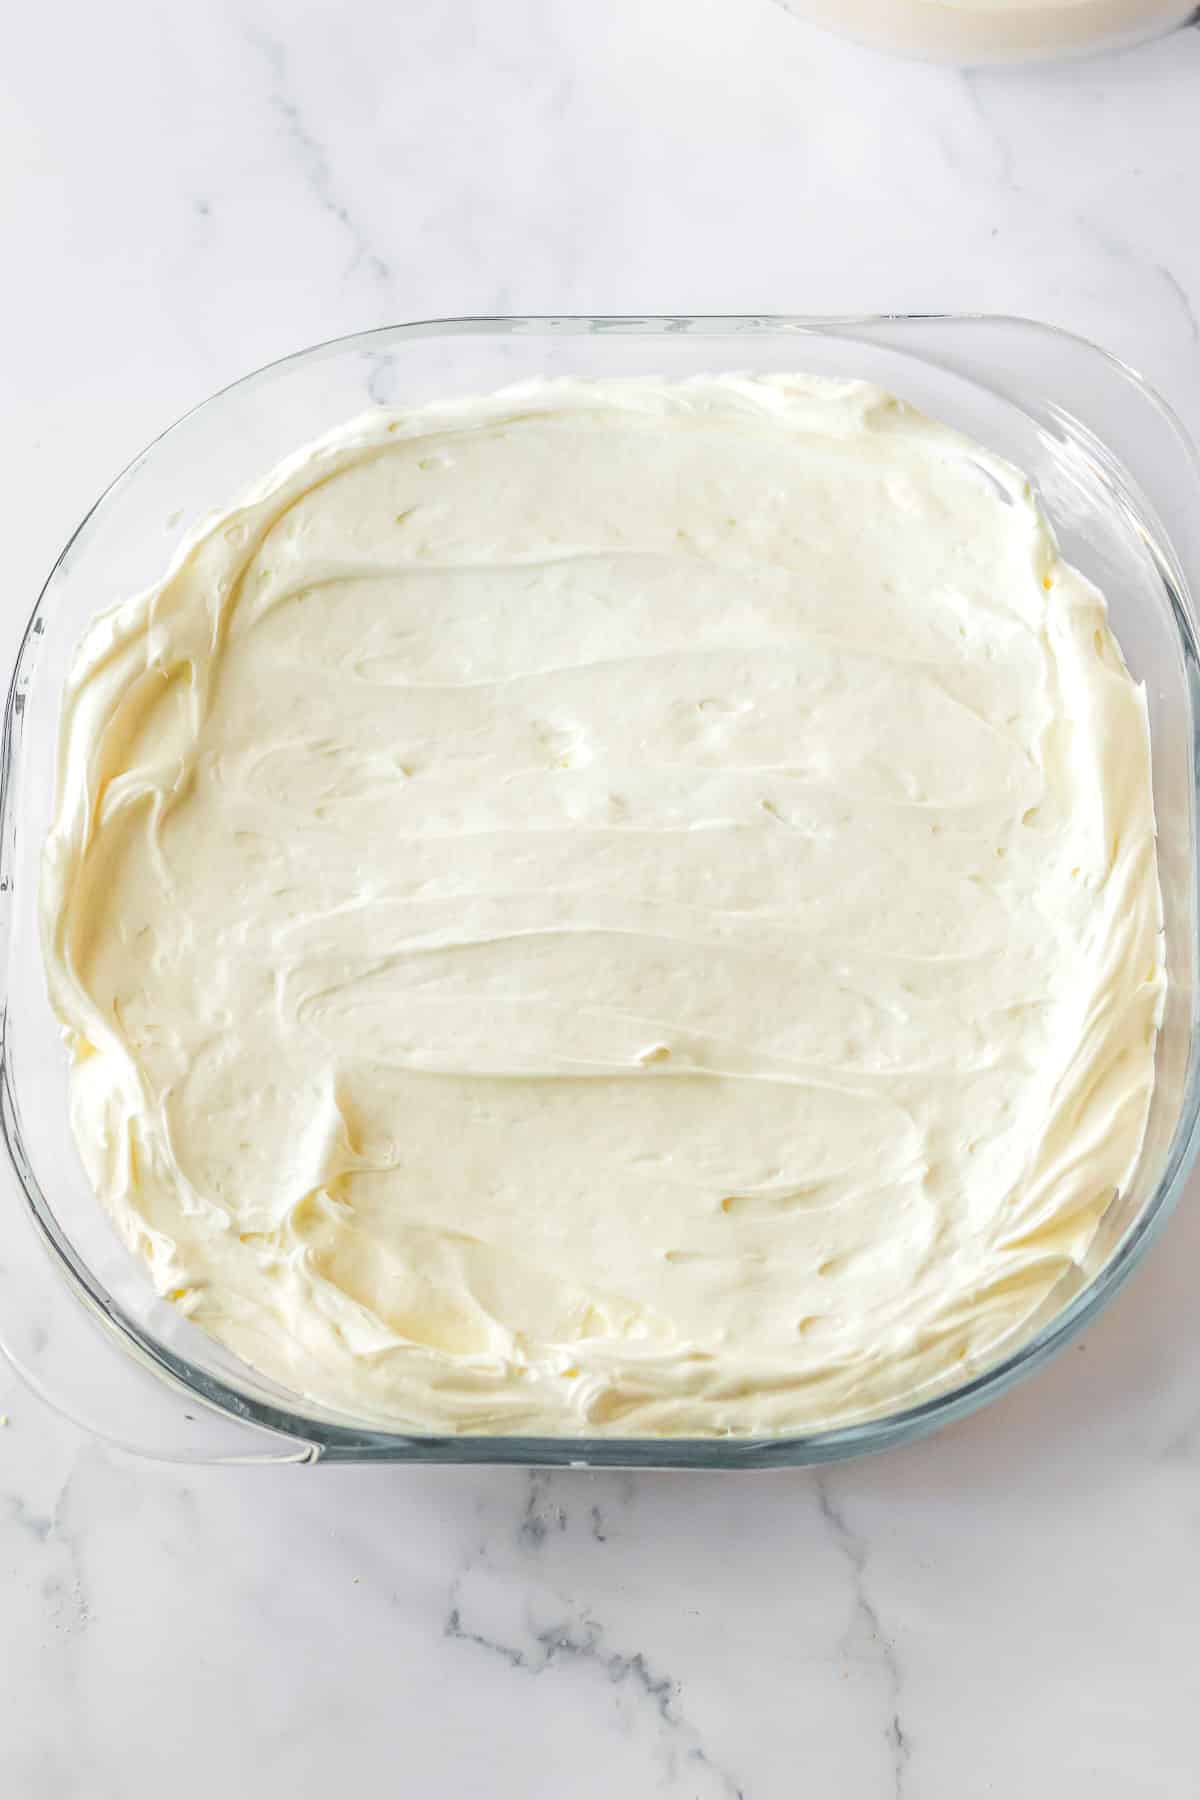 A glass baking dish with whipped topping.